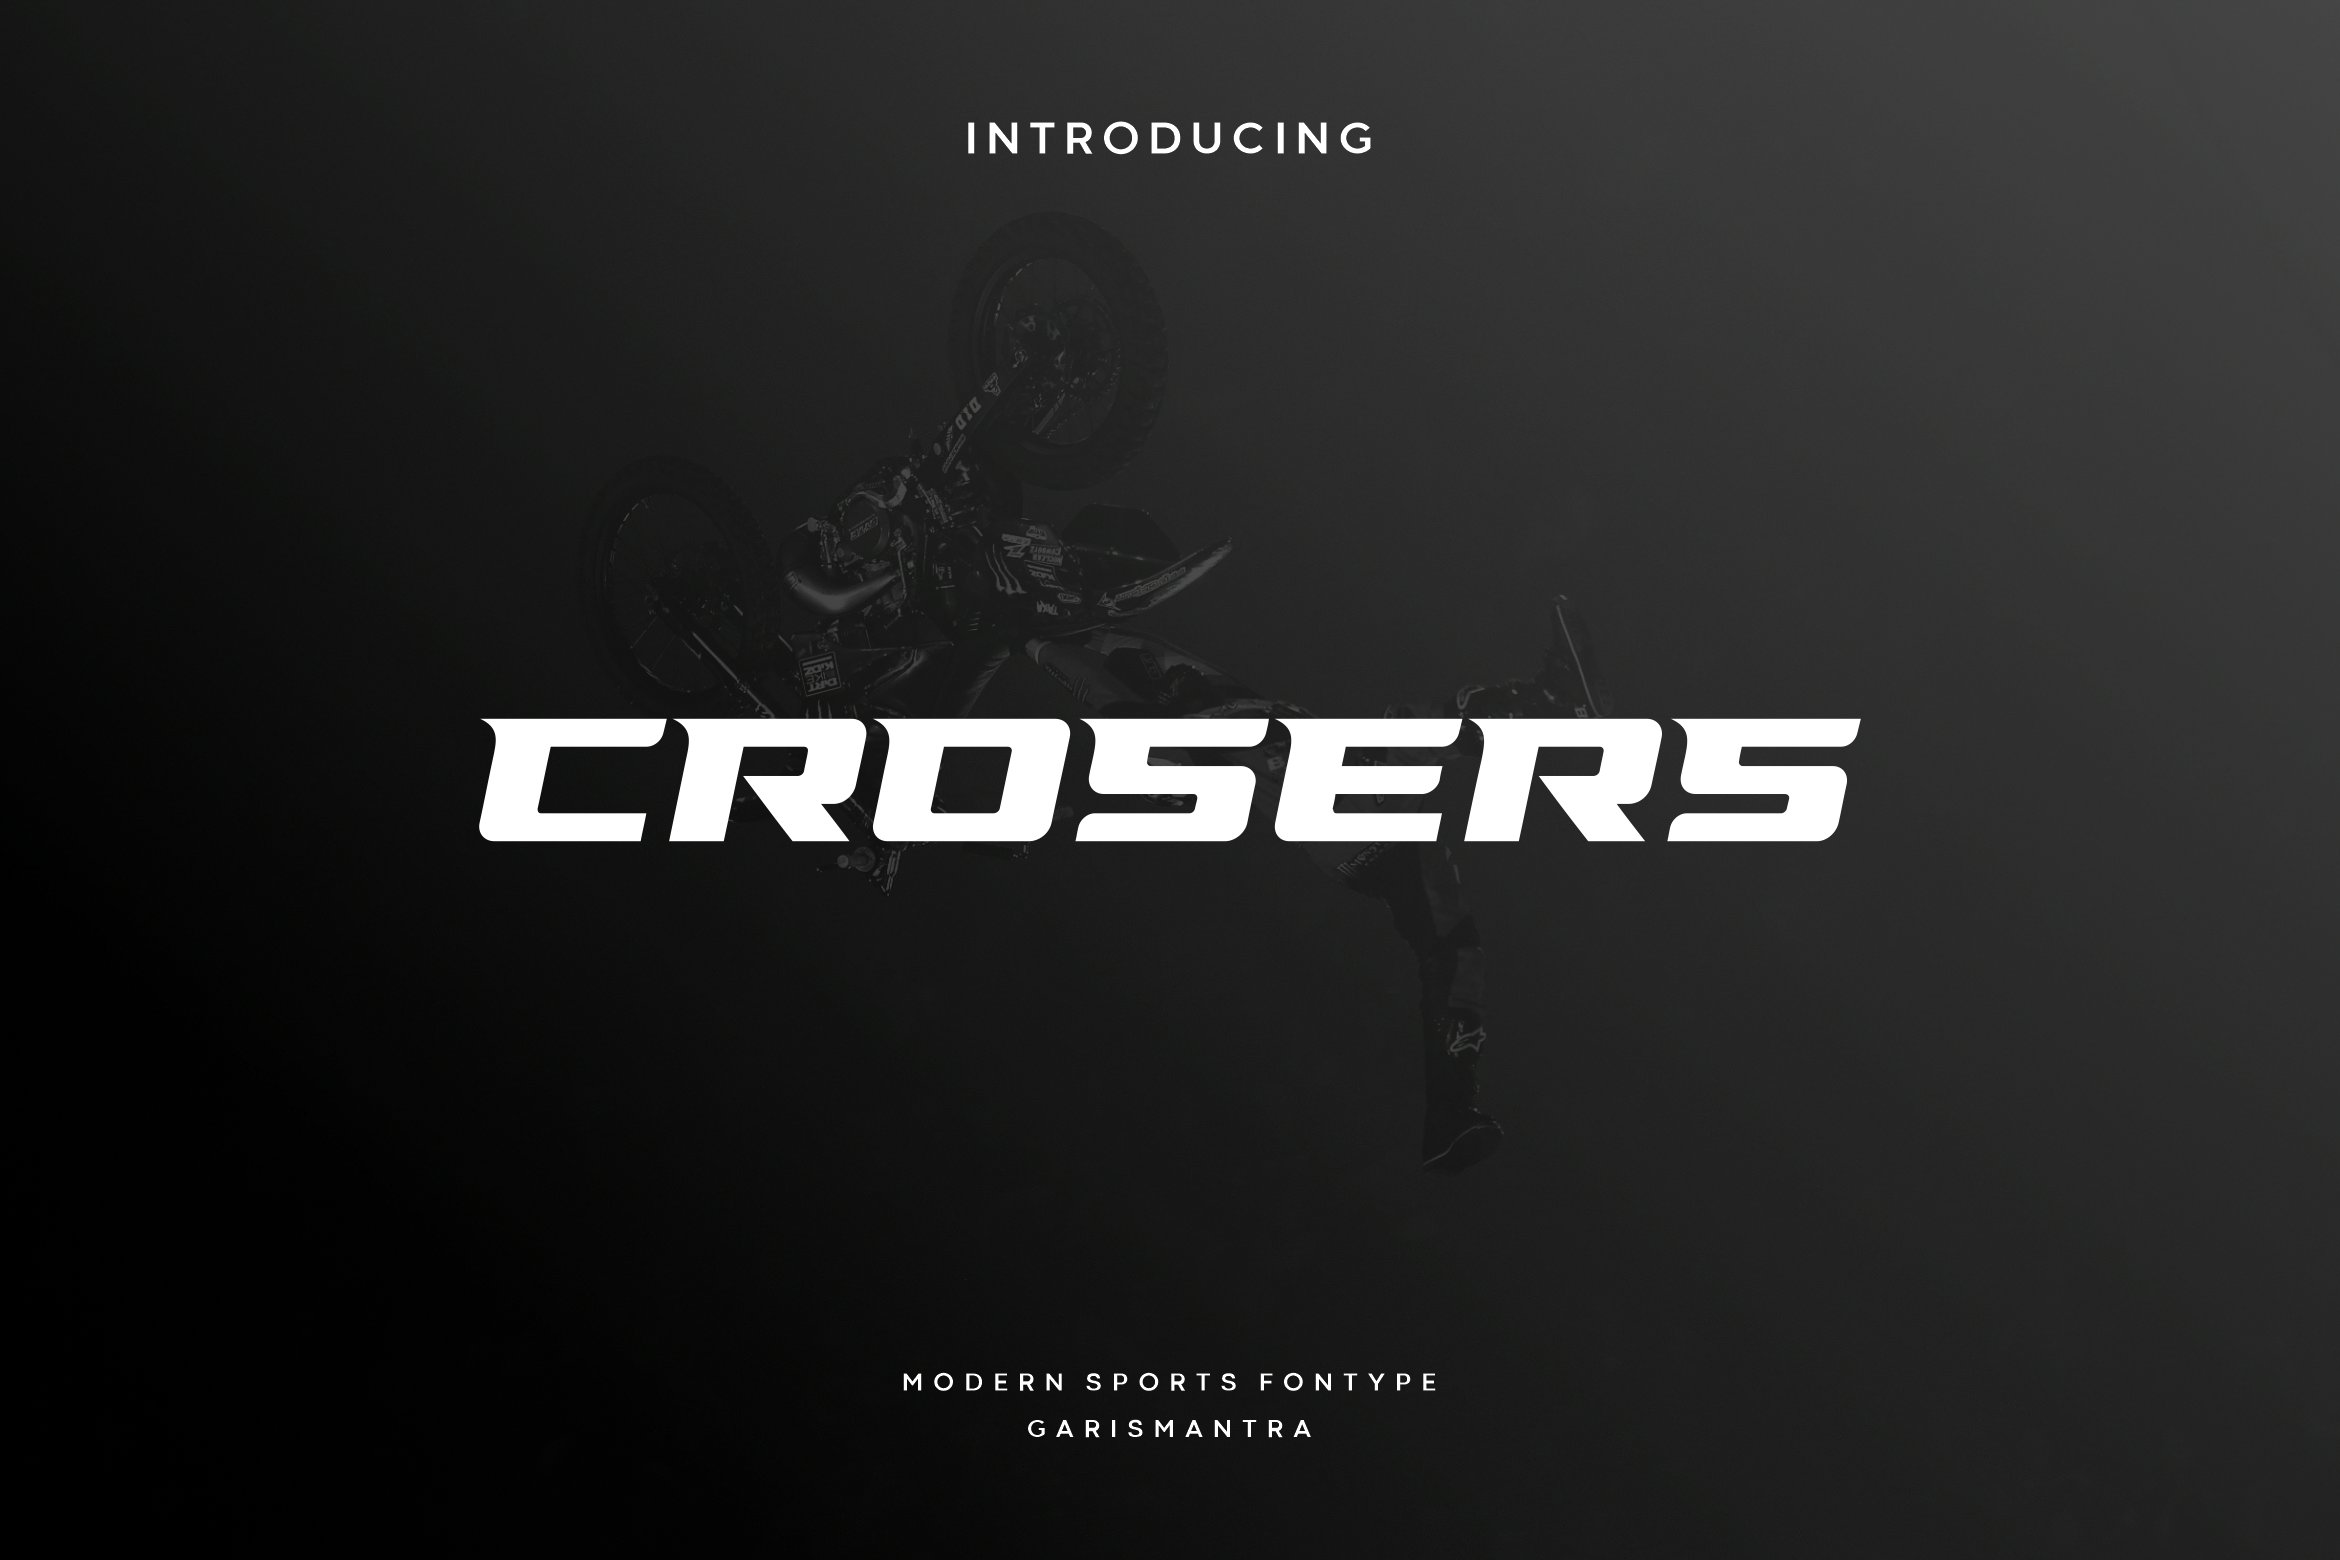 Crosers cover image.